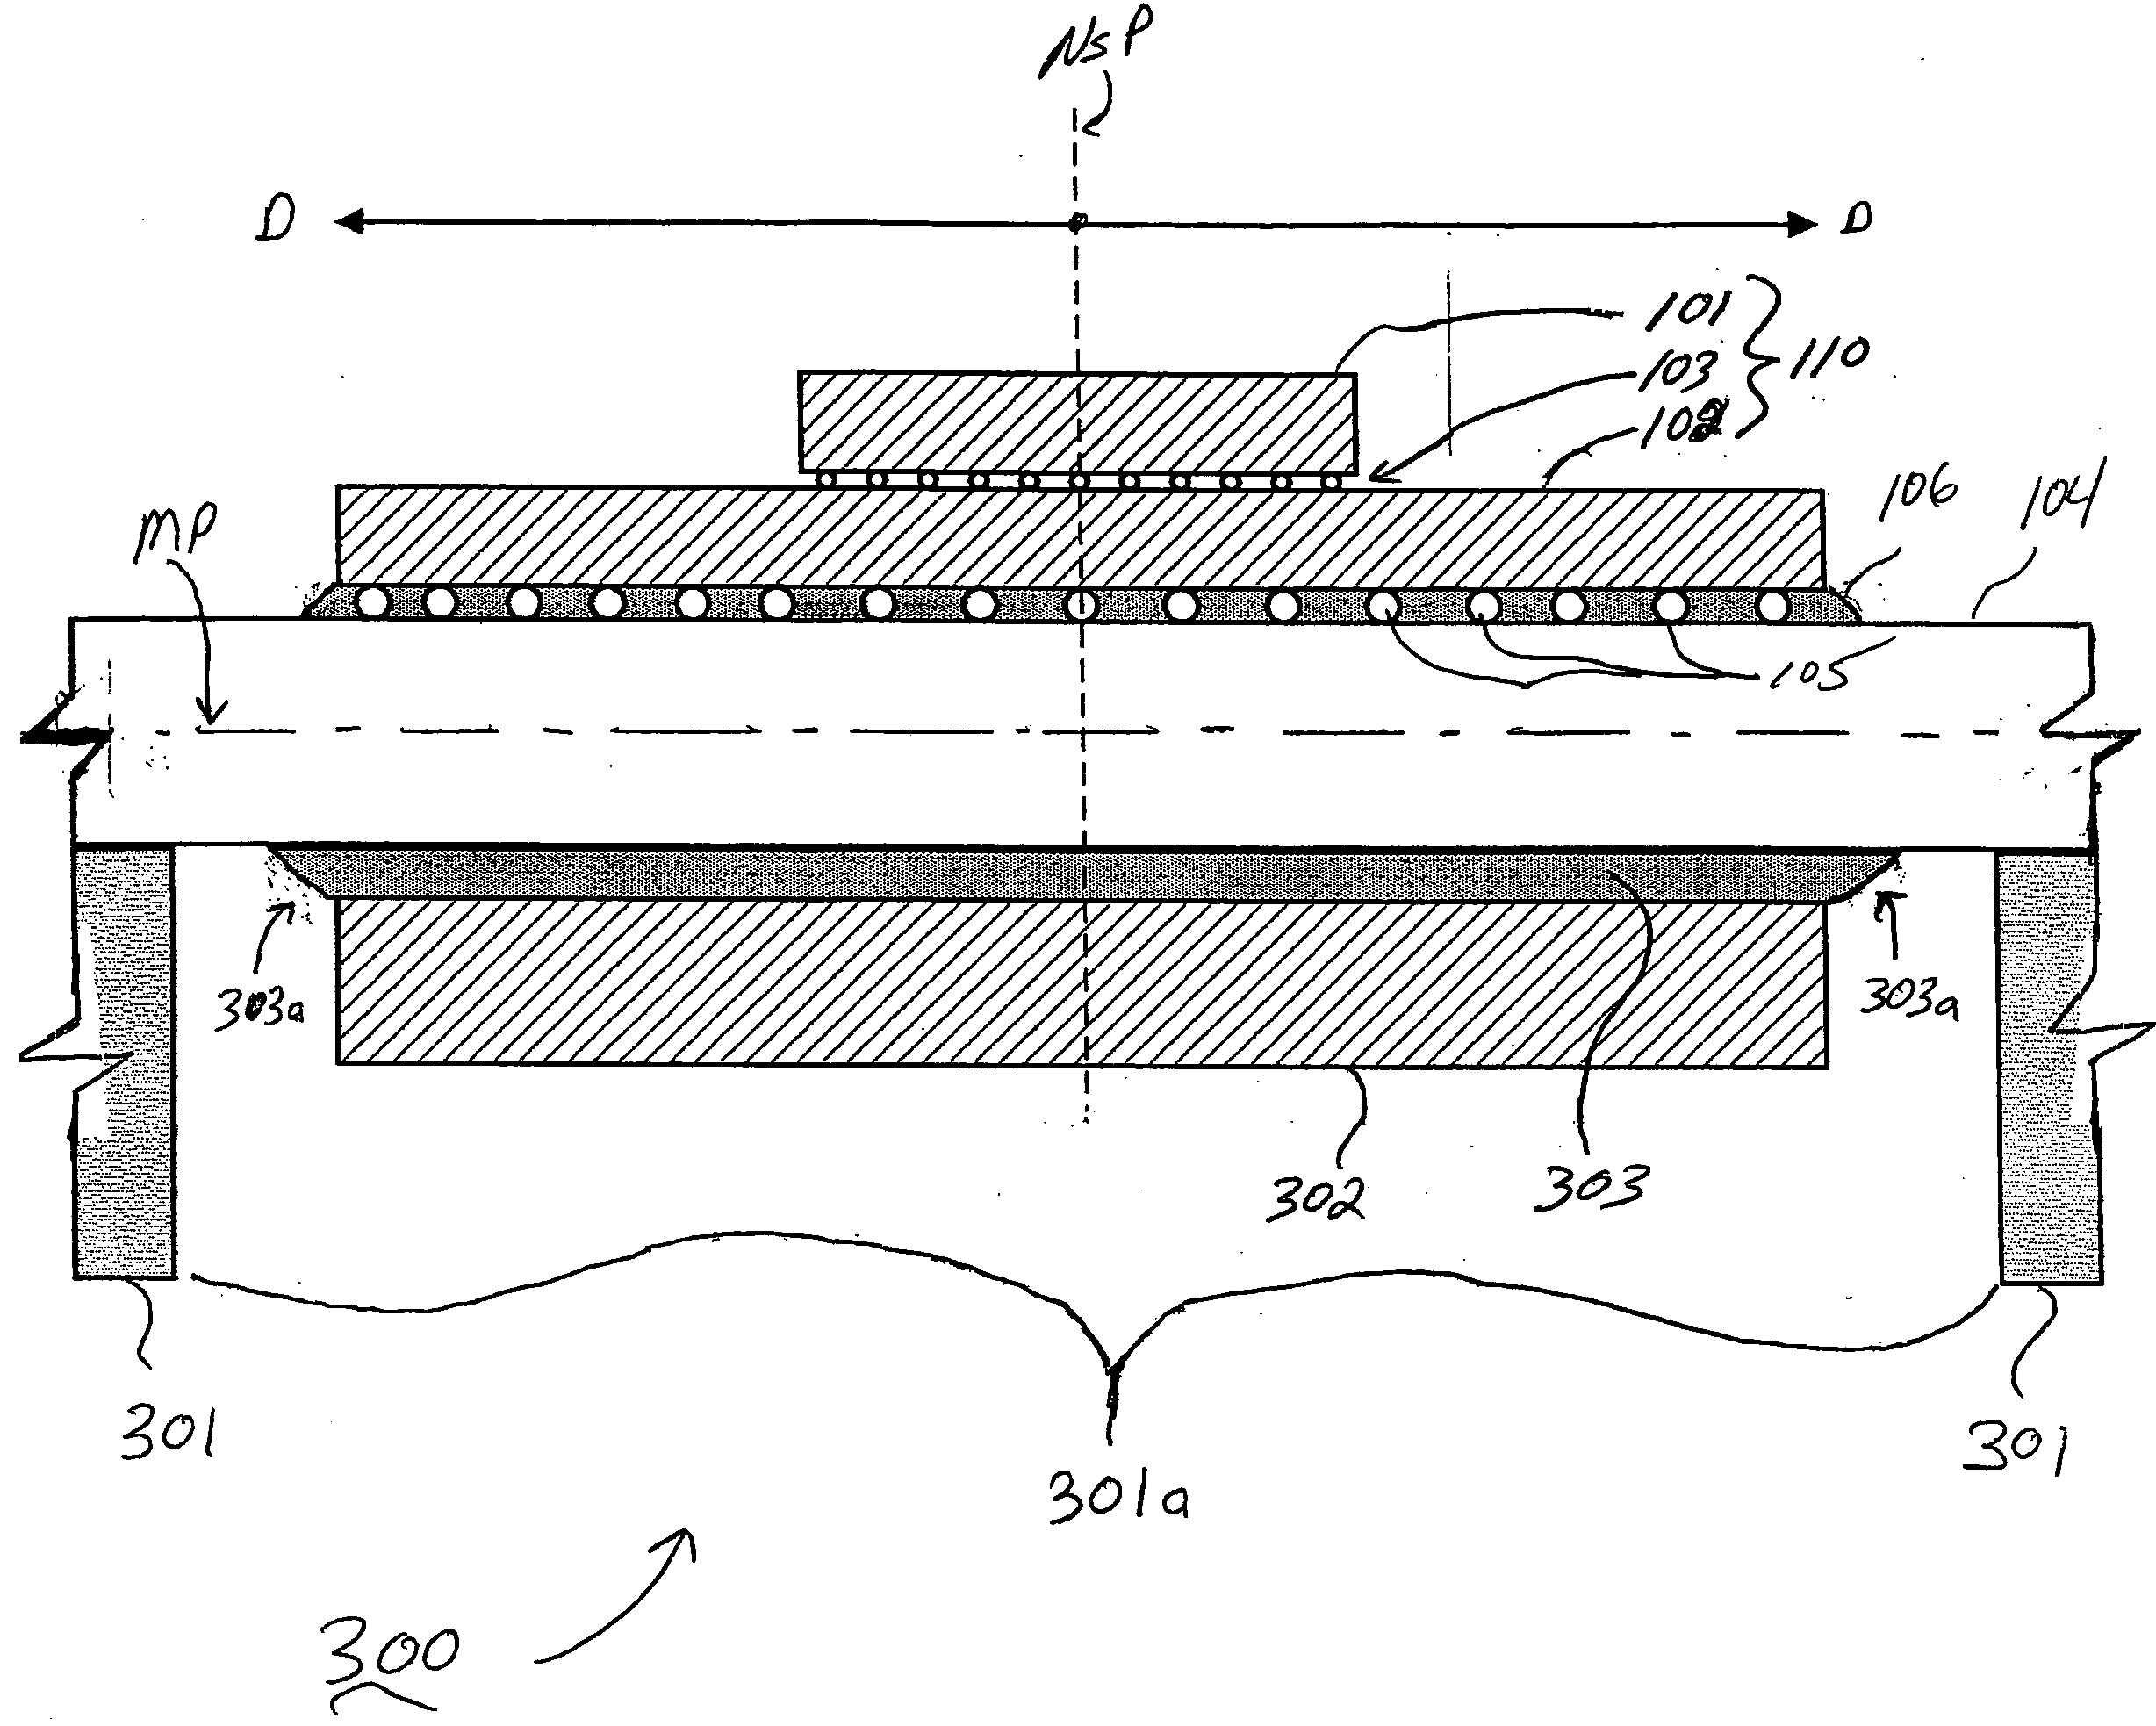 Apparatus and methods for constructing balanced chip packages to reduce thermally induced mechanical strain